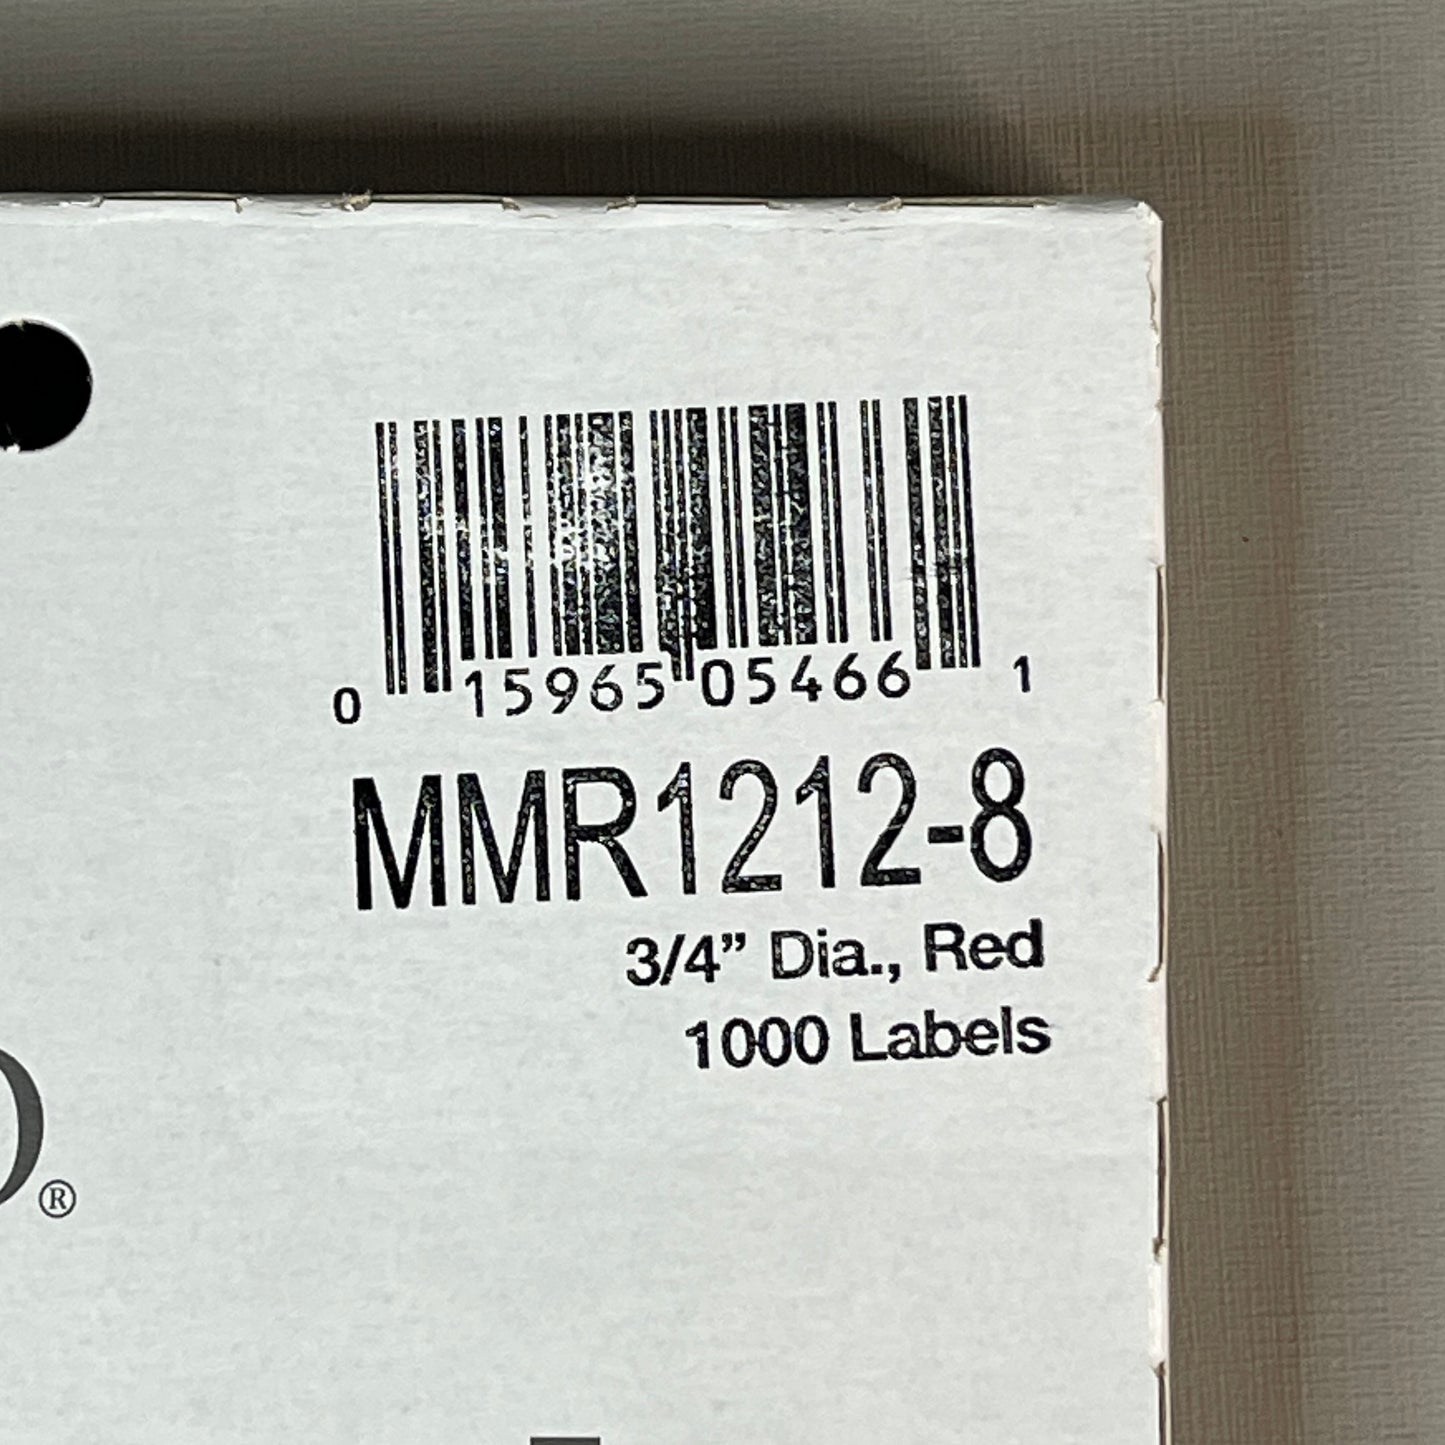 MACO Round RED Color-Coding Labels 3/4” Dia. 1000 Labels MR1212-8